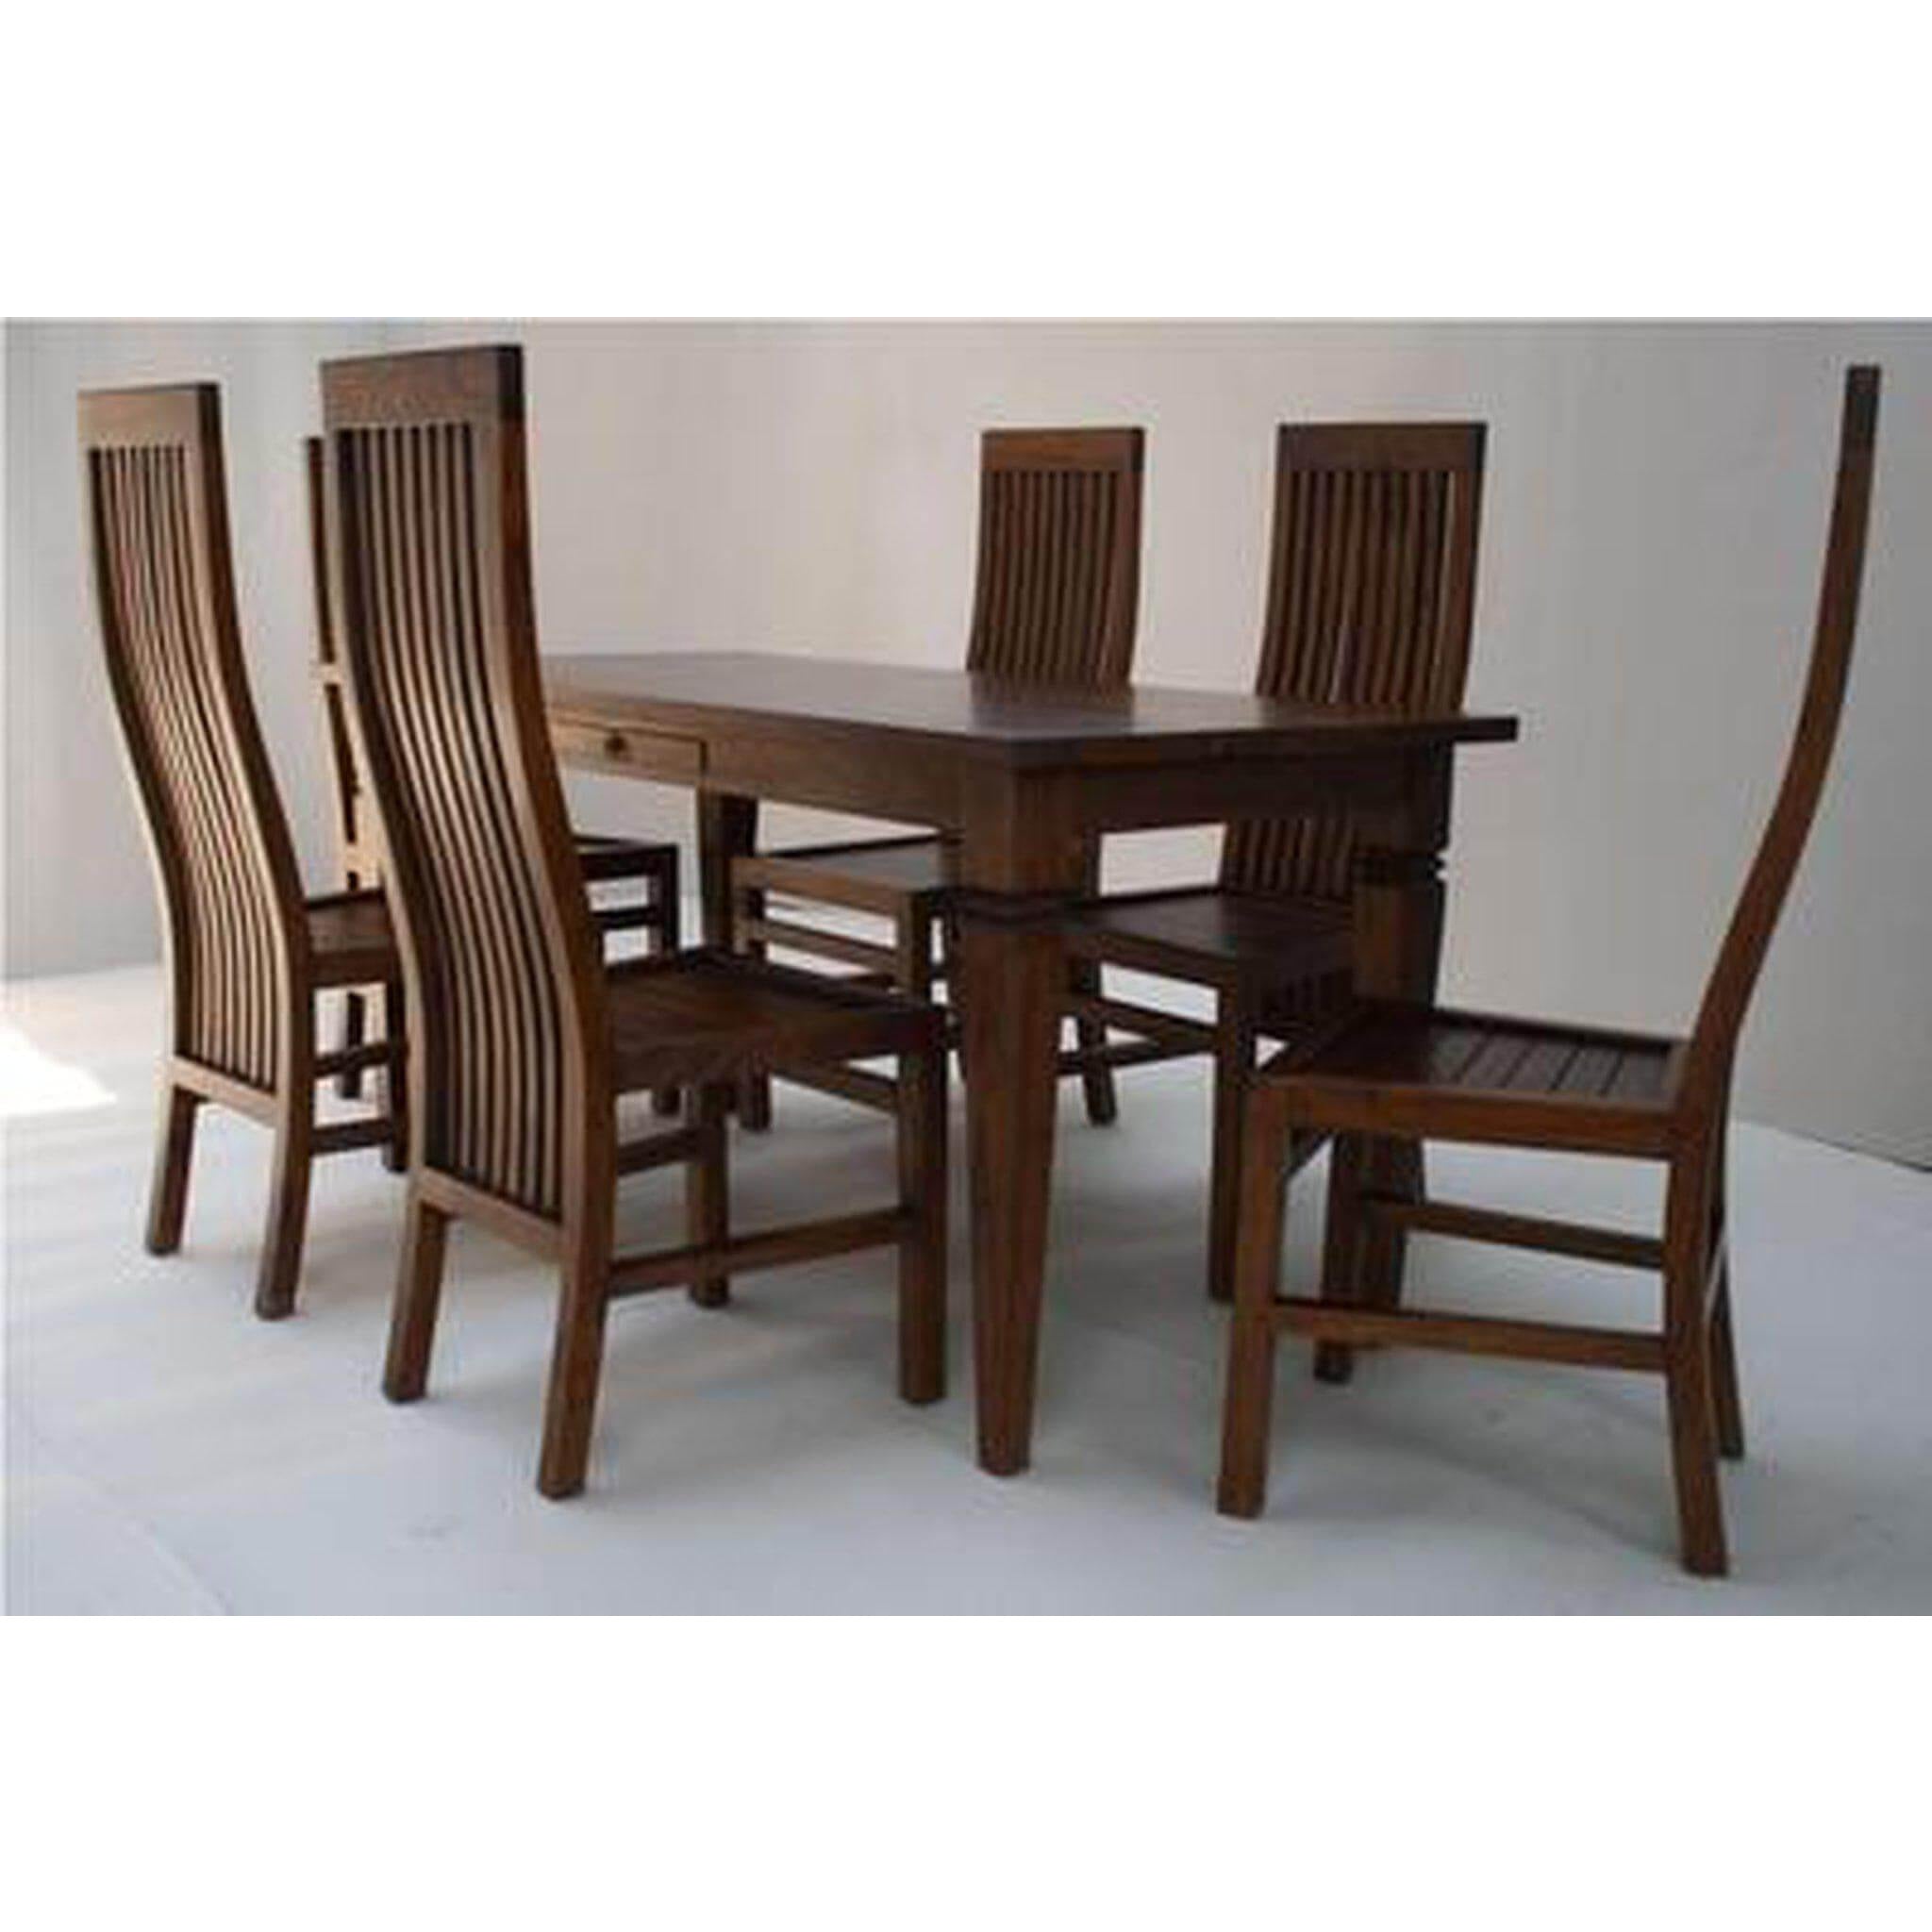 Teak Wood Dining Table With 6 Chairs TDT-3001 - TimberCraft